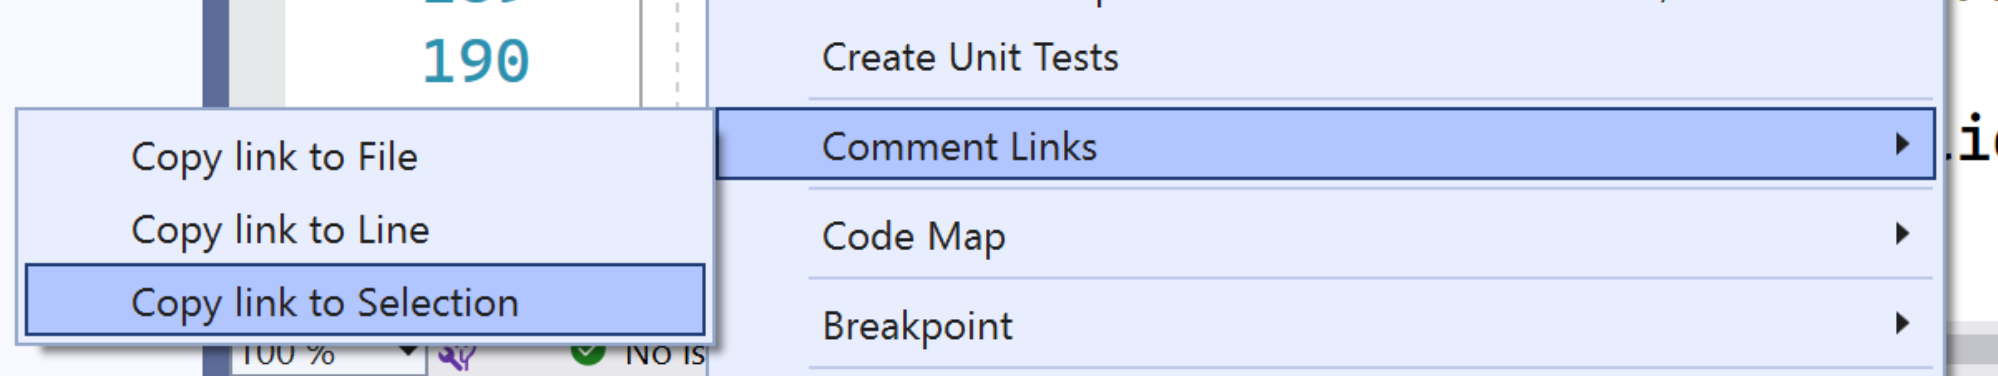 Example of the options in the context menu